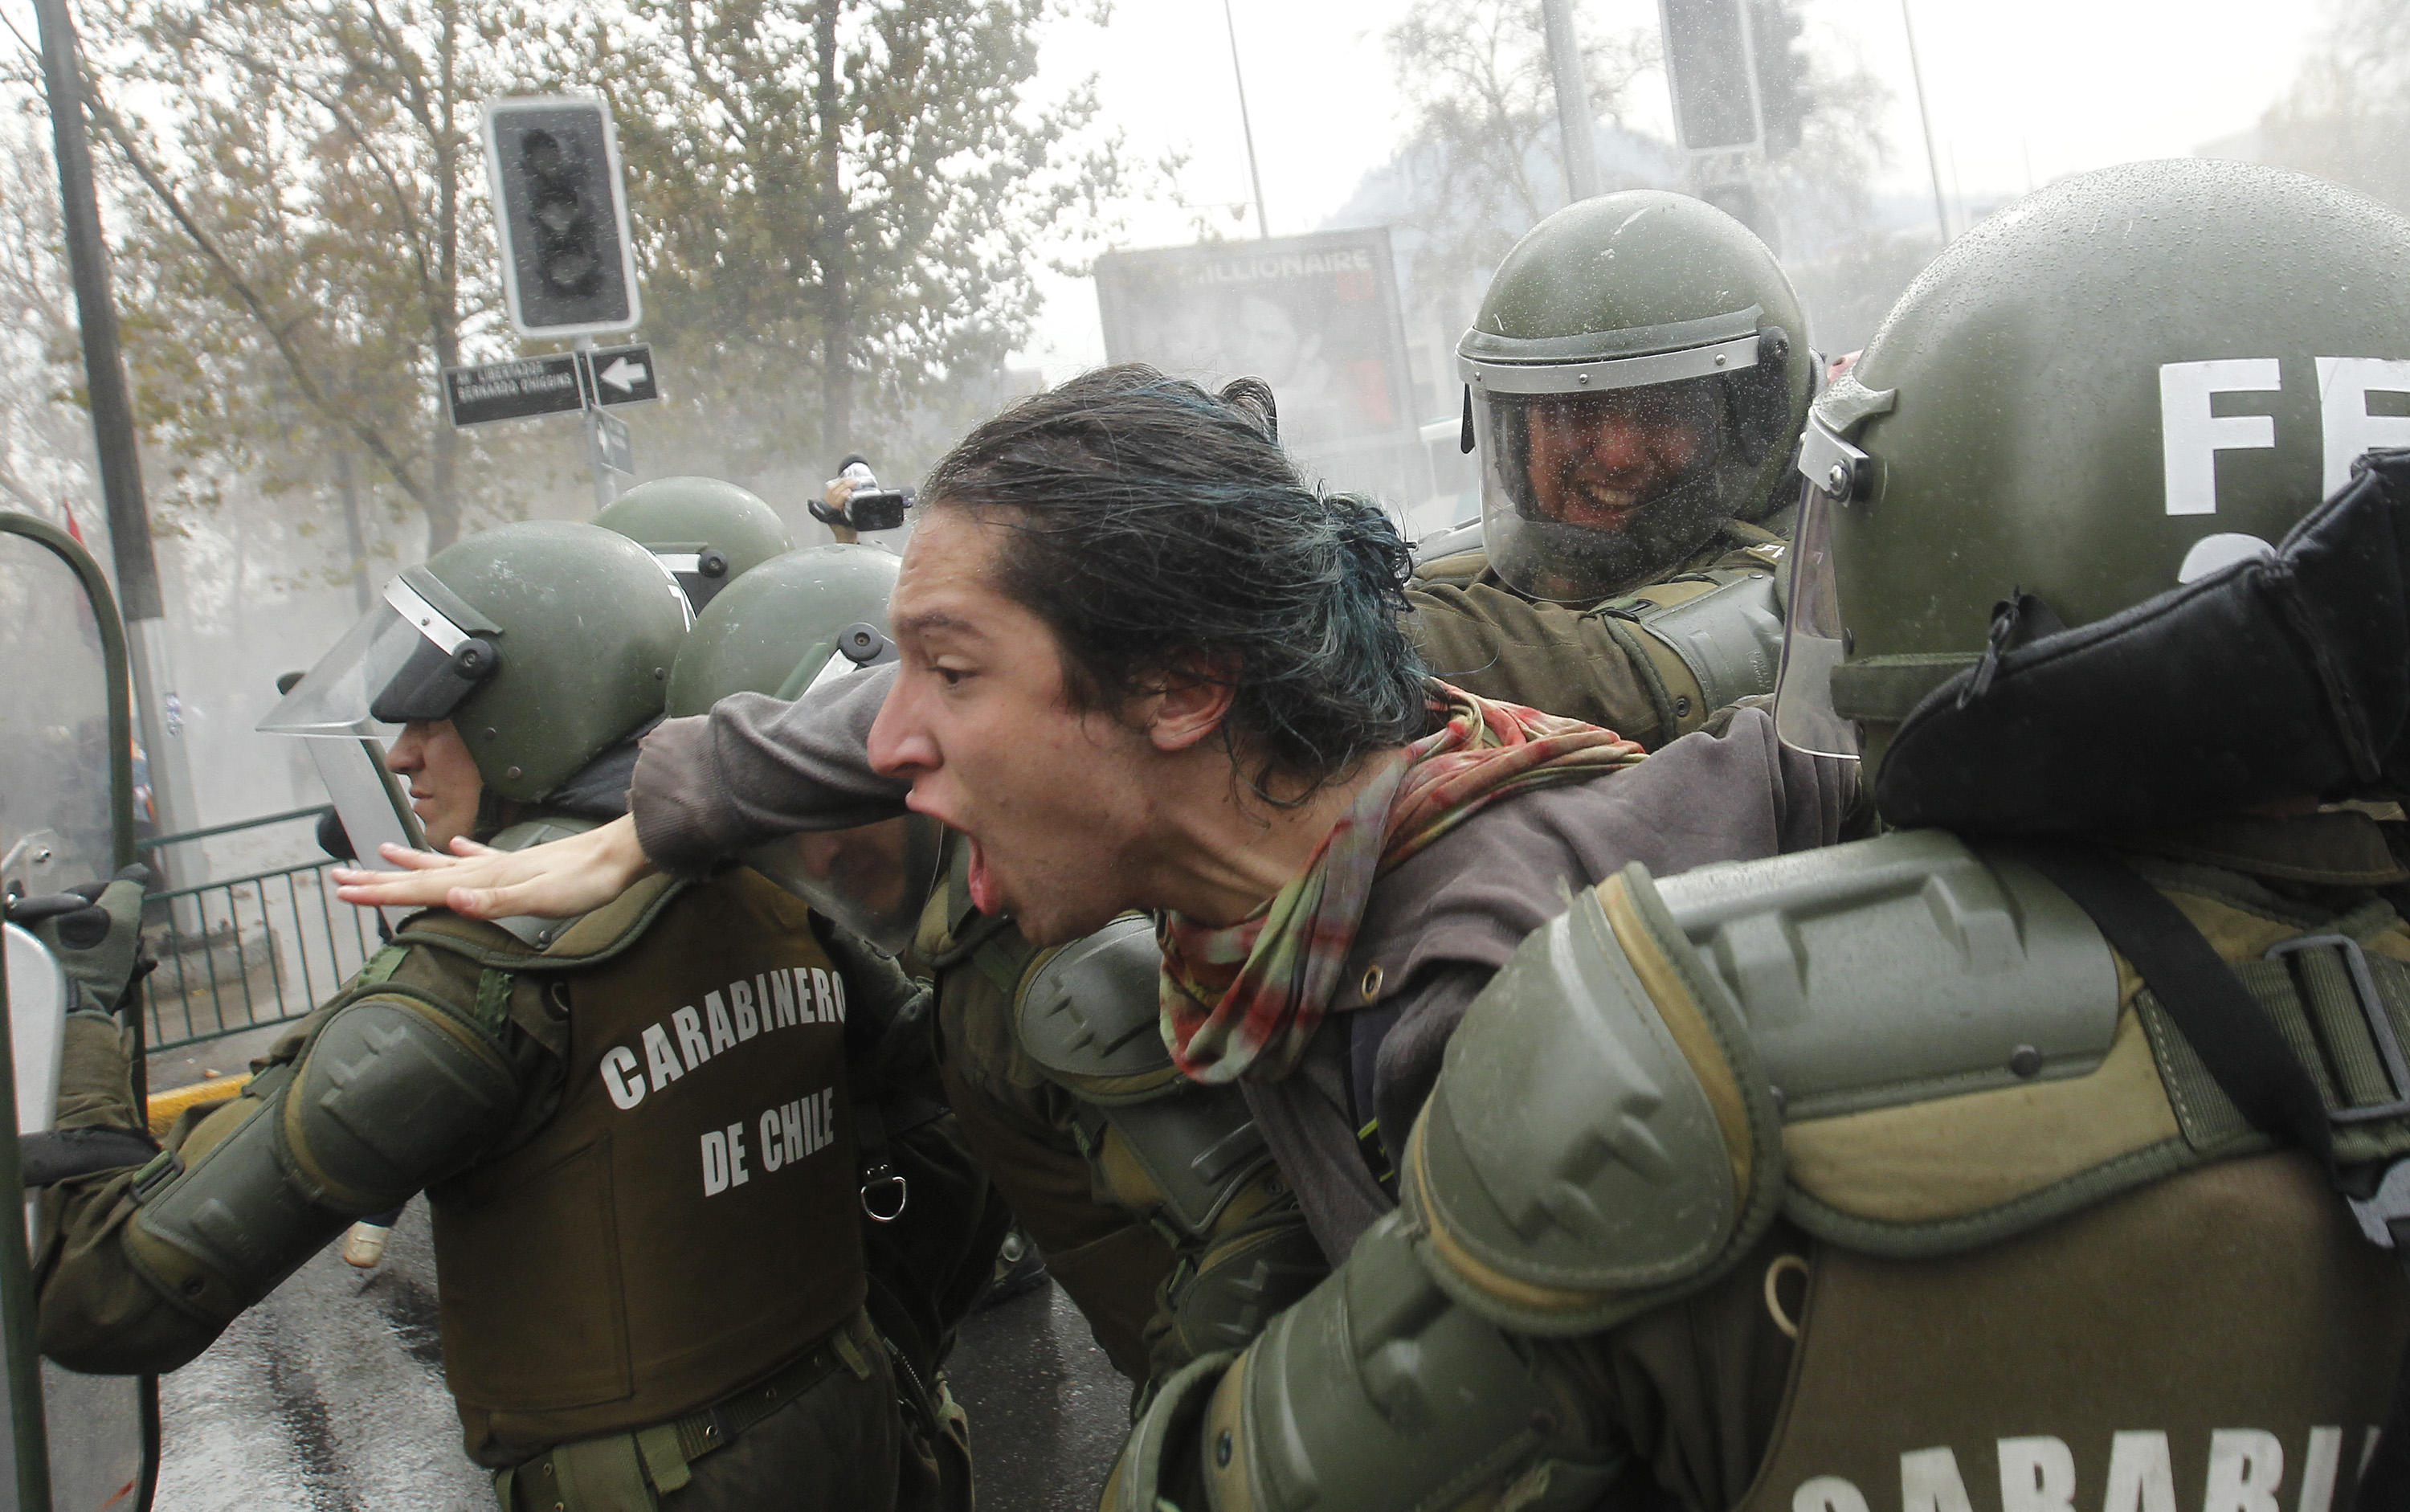 CHILE-PROTEST-EDUCATION